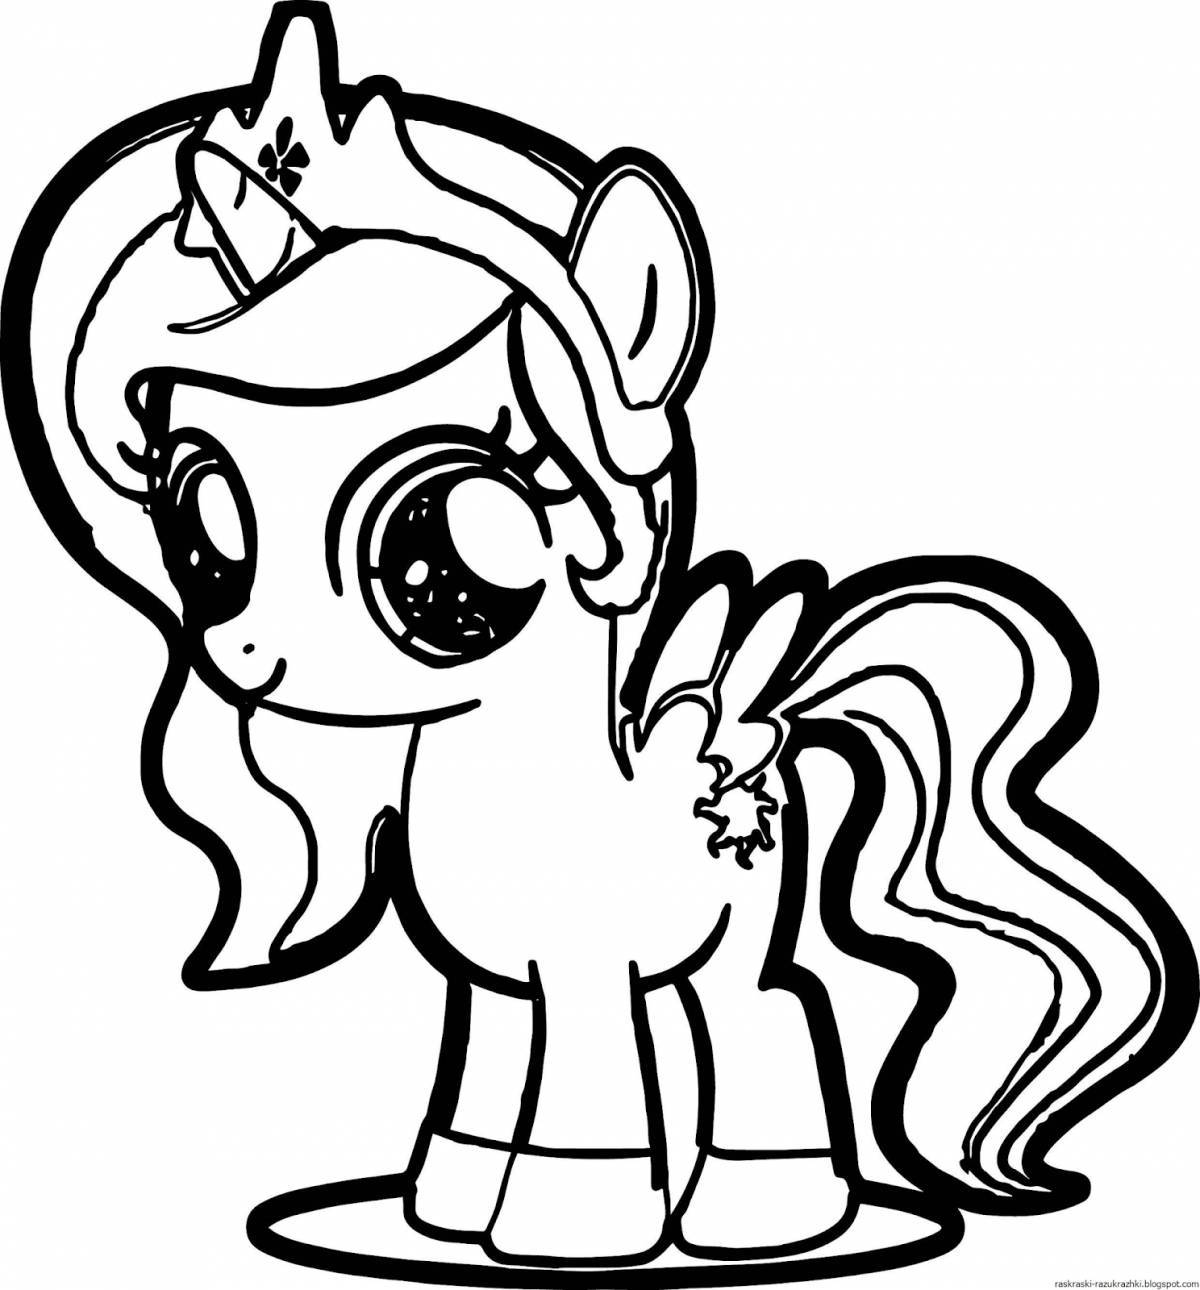 Radiant pony coloring pages